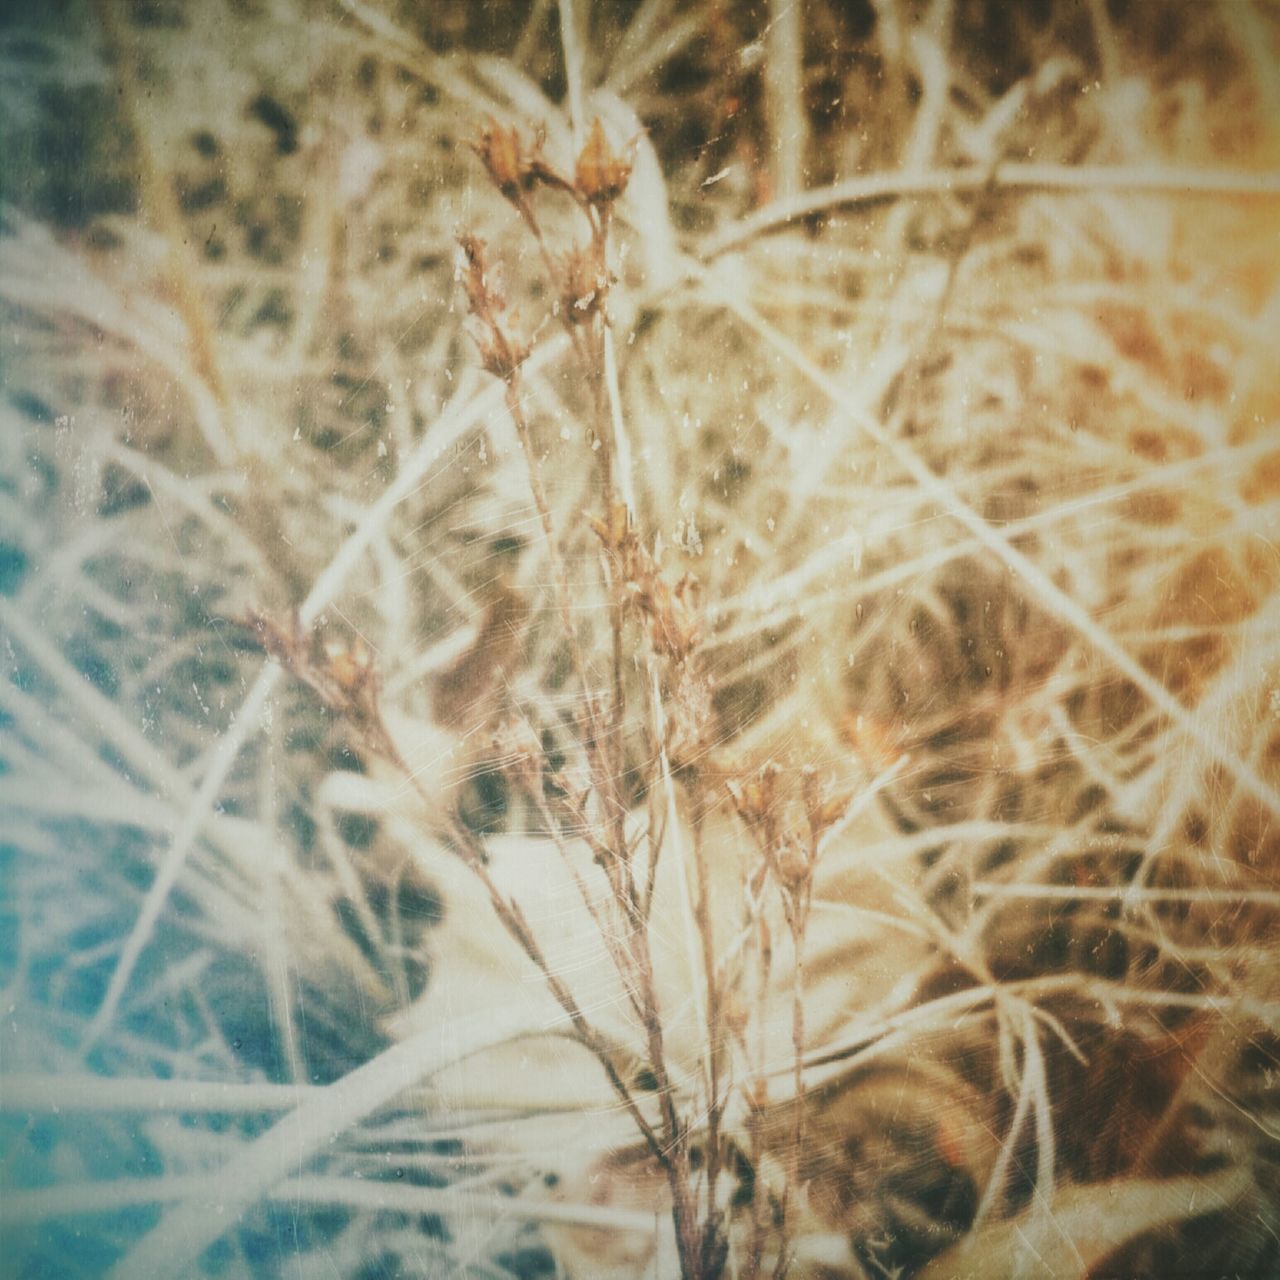 close-up, dry, nature, plant, growth, selective focus, field, focus on foreground, no people, outdoors, grass, day, sunlight, fragility, tranquility, beauty in nature, dead plant, full frame, backgrounds, natural pattern